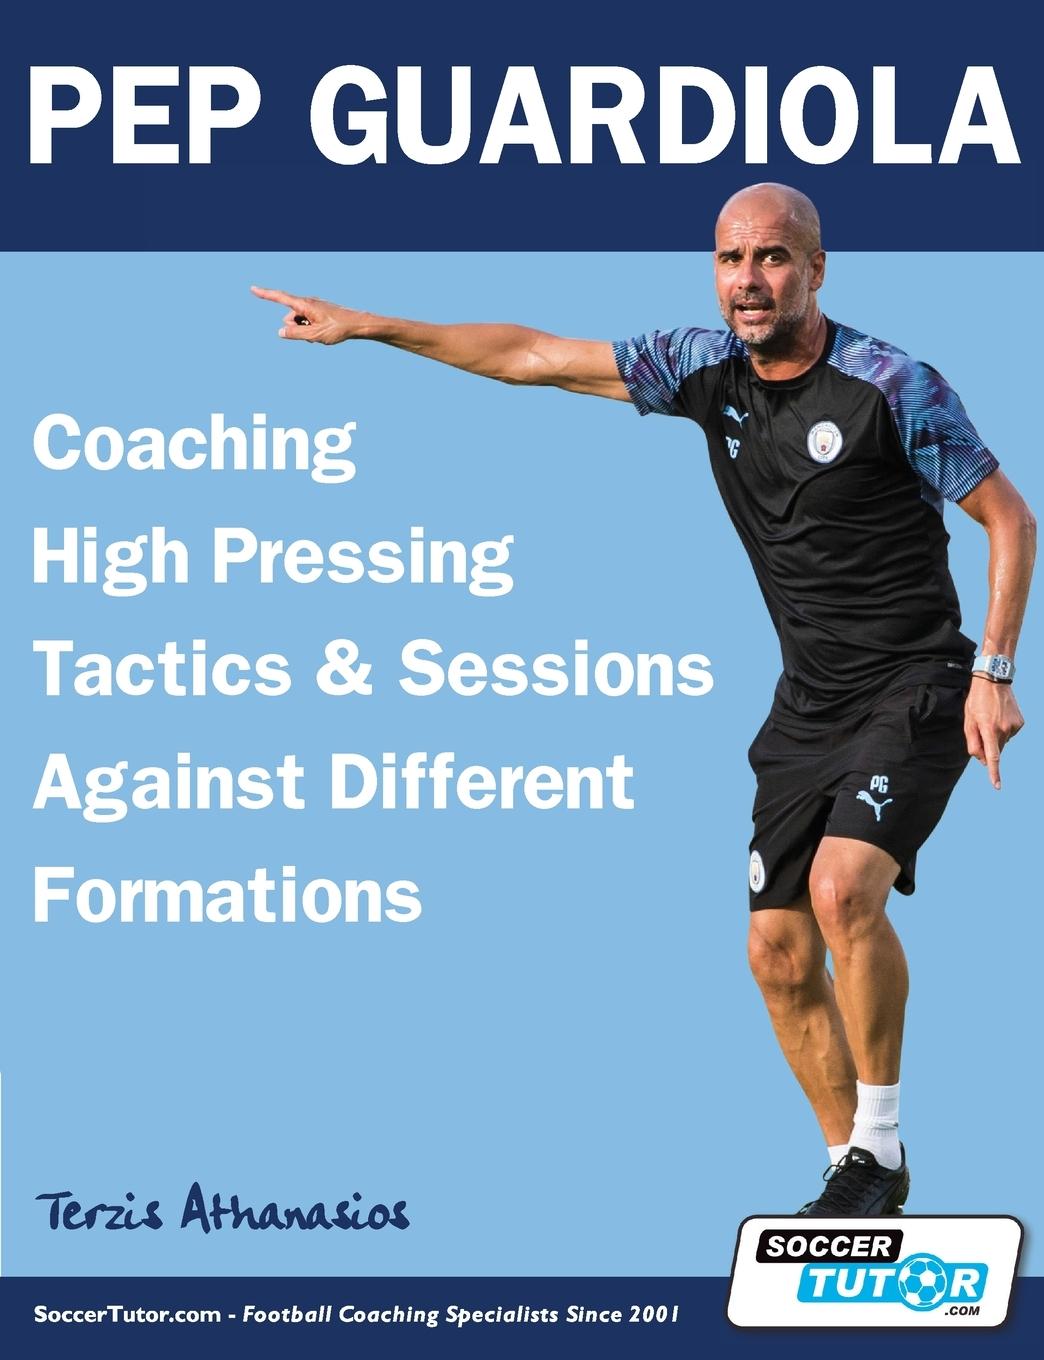 Książka Pep Guardiola - Coaching High Pressing Tactics & Sessions Against Different Formations 